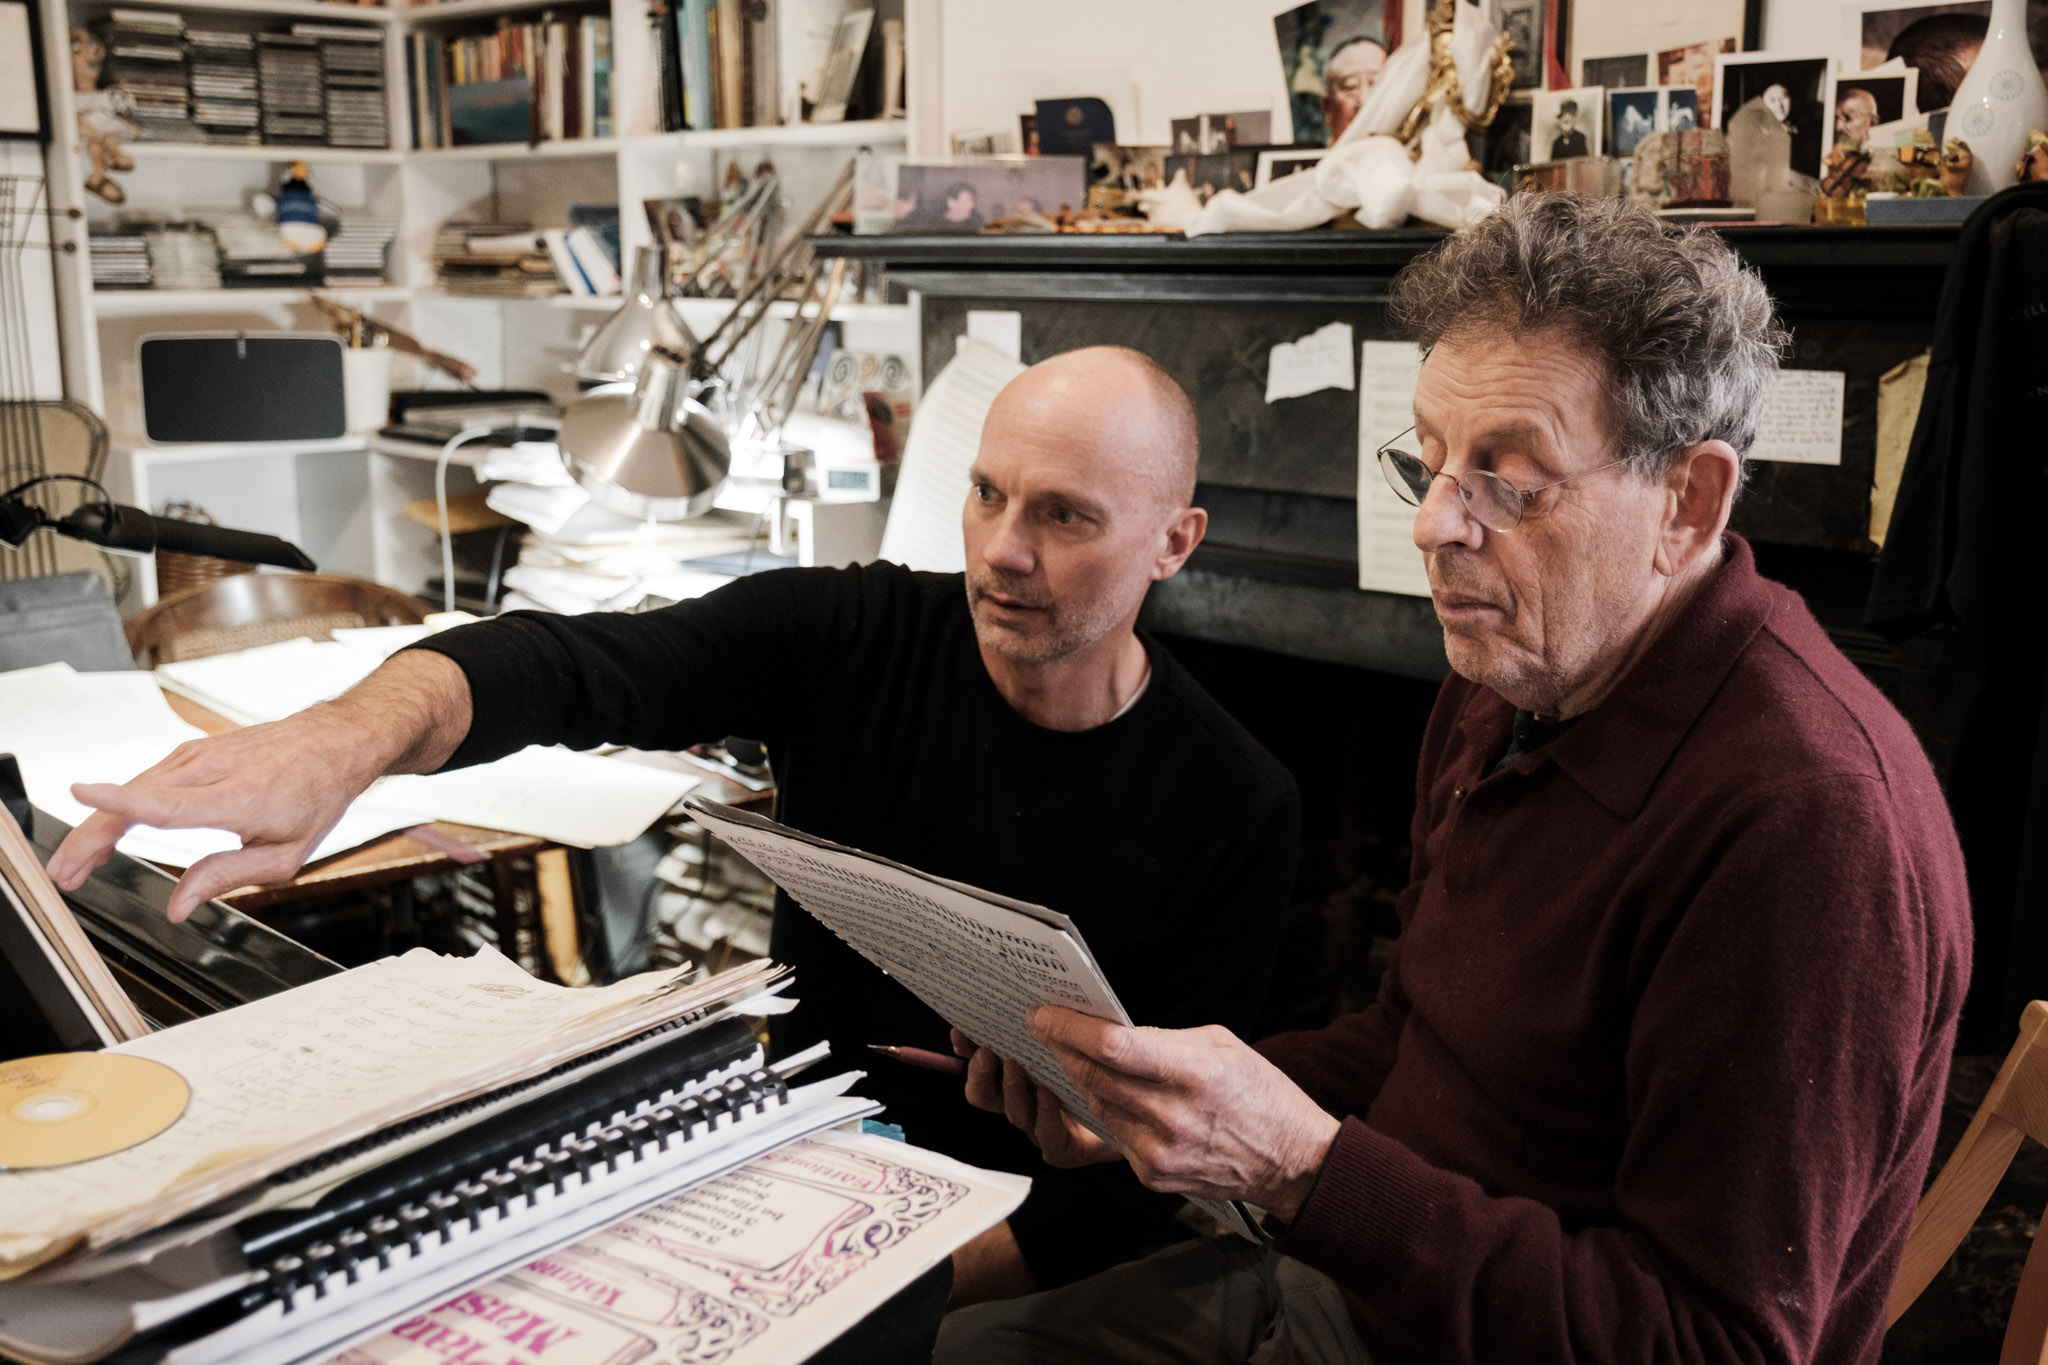 Paul Barnes (left) and Philip Glass review the score for "Annunciation." Photo by Peter Barnes.